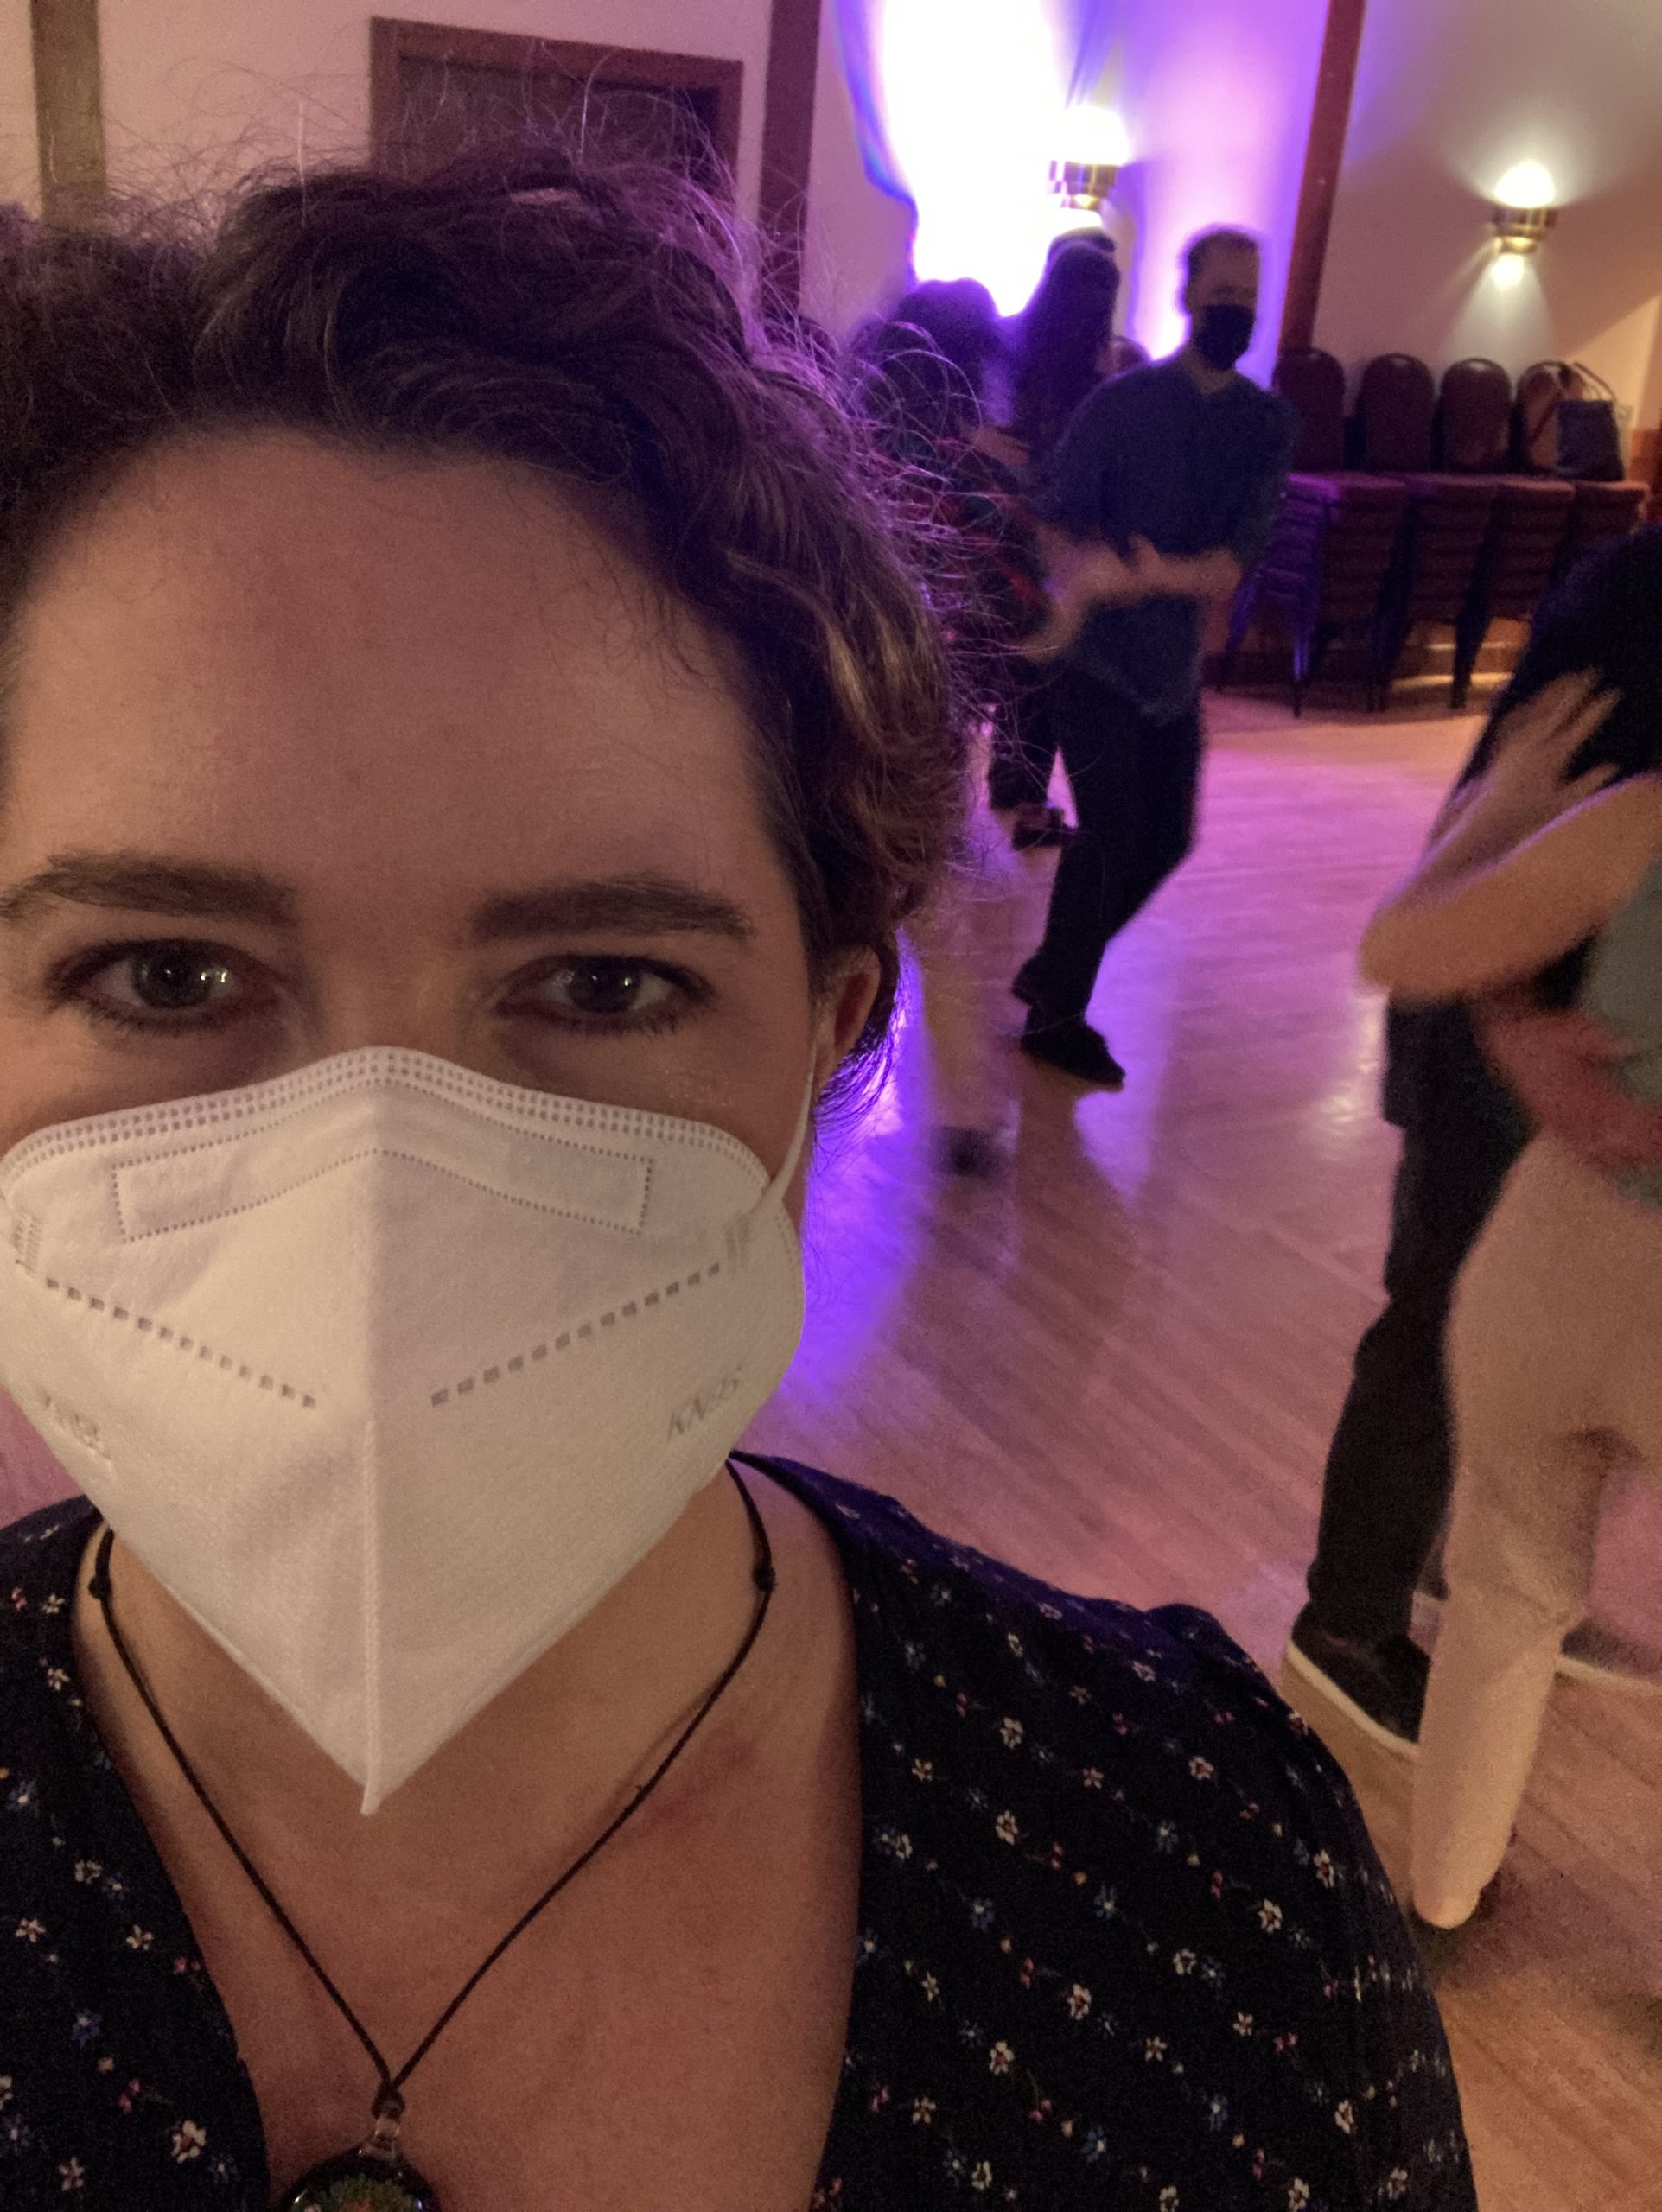 A selfie of Eve Rickert at a swing dance event. She looks into the camera wearing a white N95 mask and smiling. Masked people dance behind her.